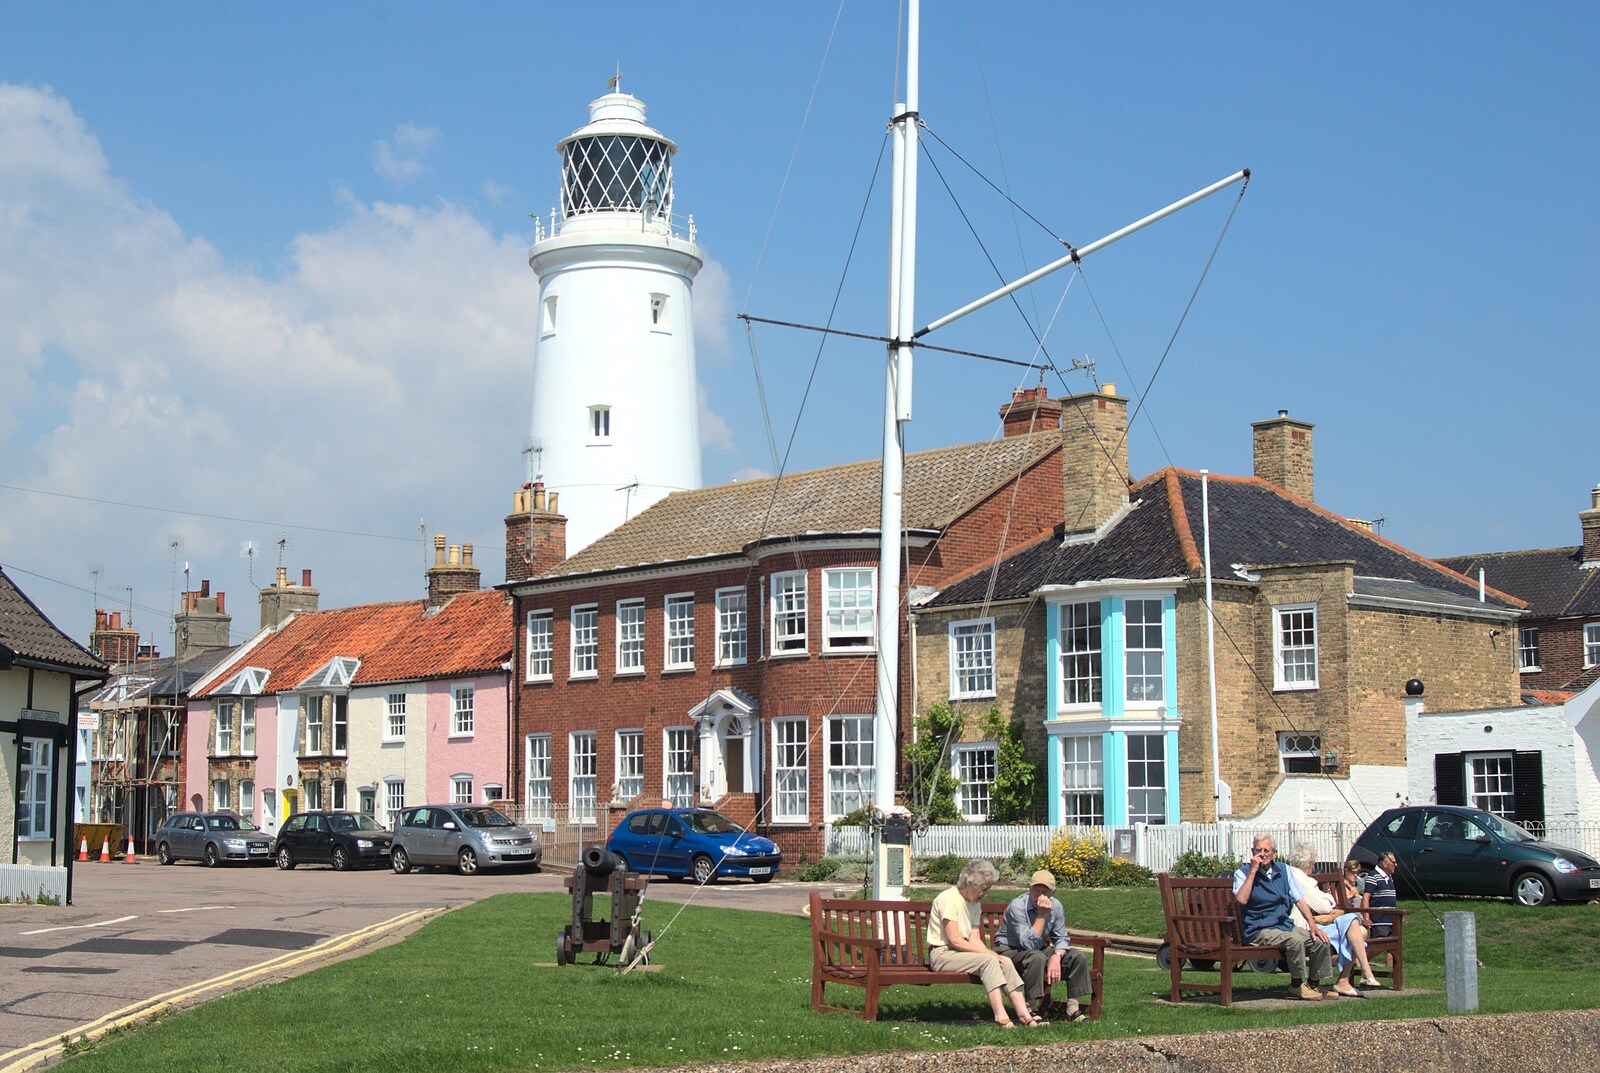 St. James's Green and the lighthouse from The First Anniversary, Southwold, Suffolk - 3rd July 2011